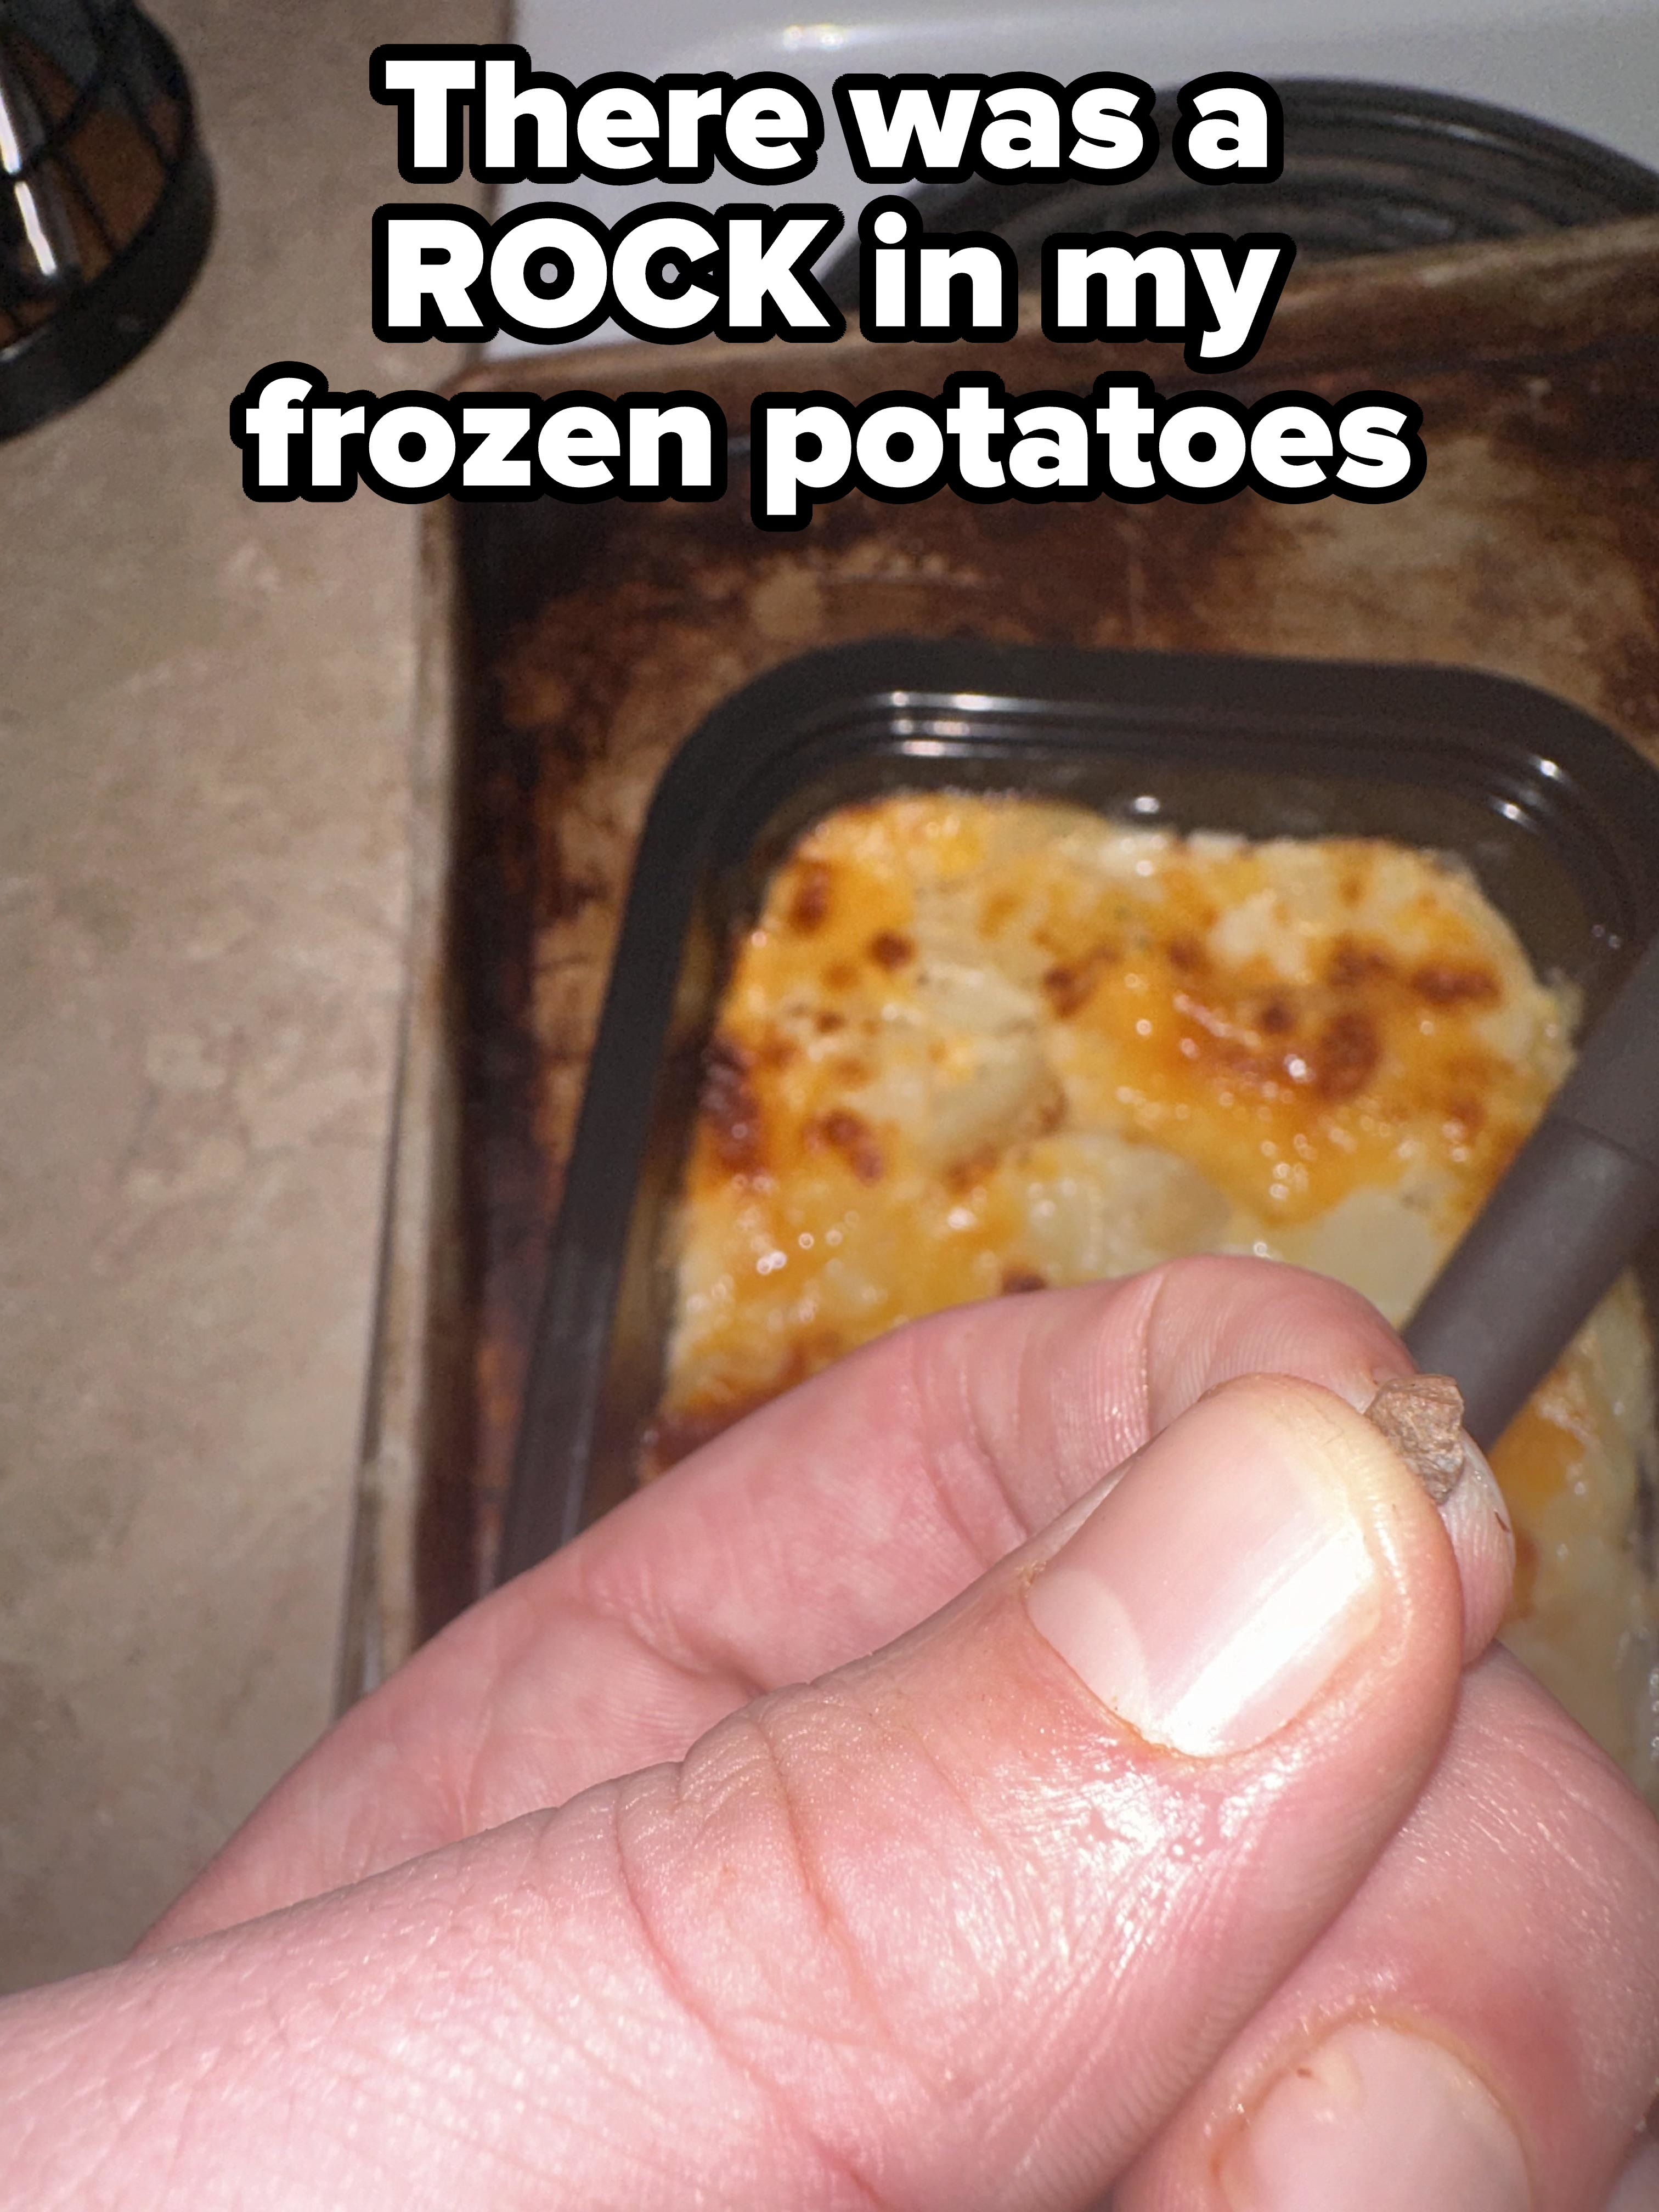 &quot;There was a rock in my frozen potatoes&quot; with someone holding a pebble above the potatoes